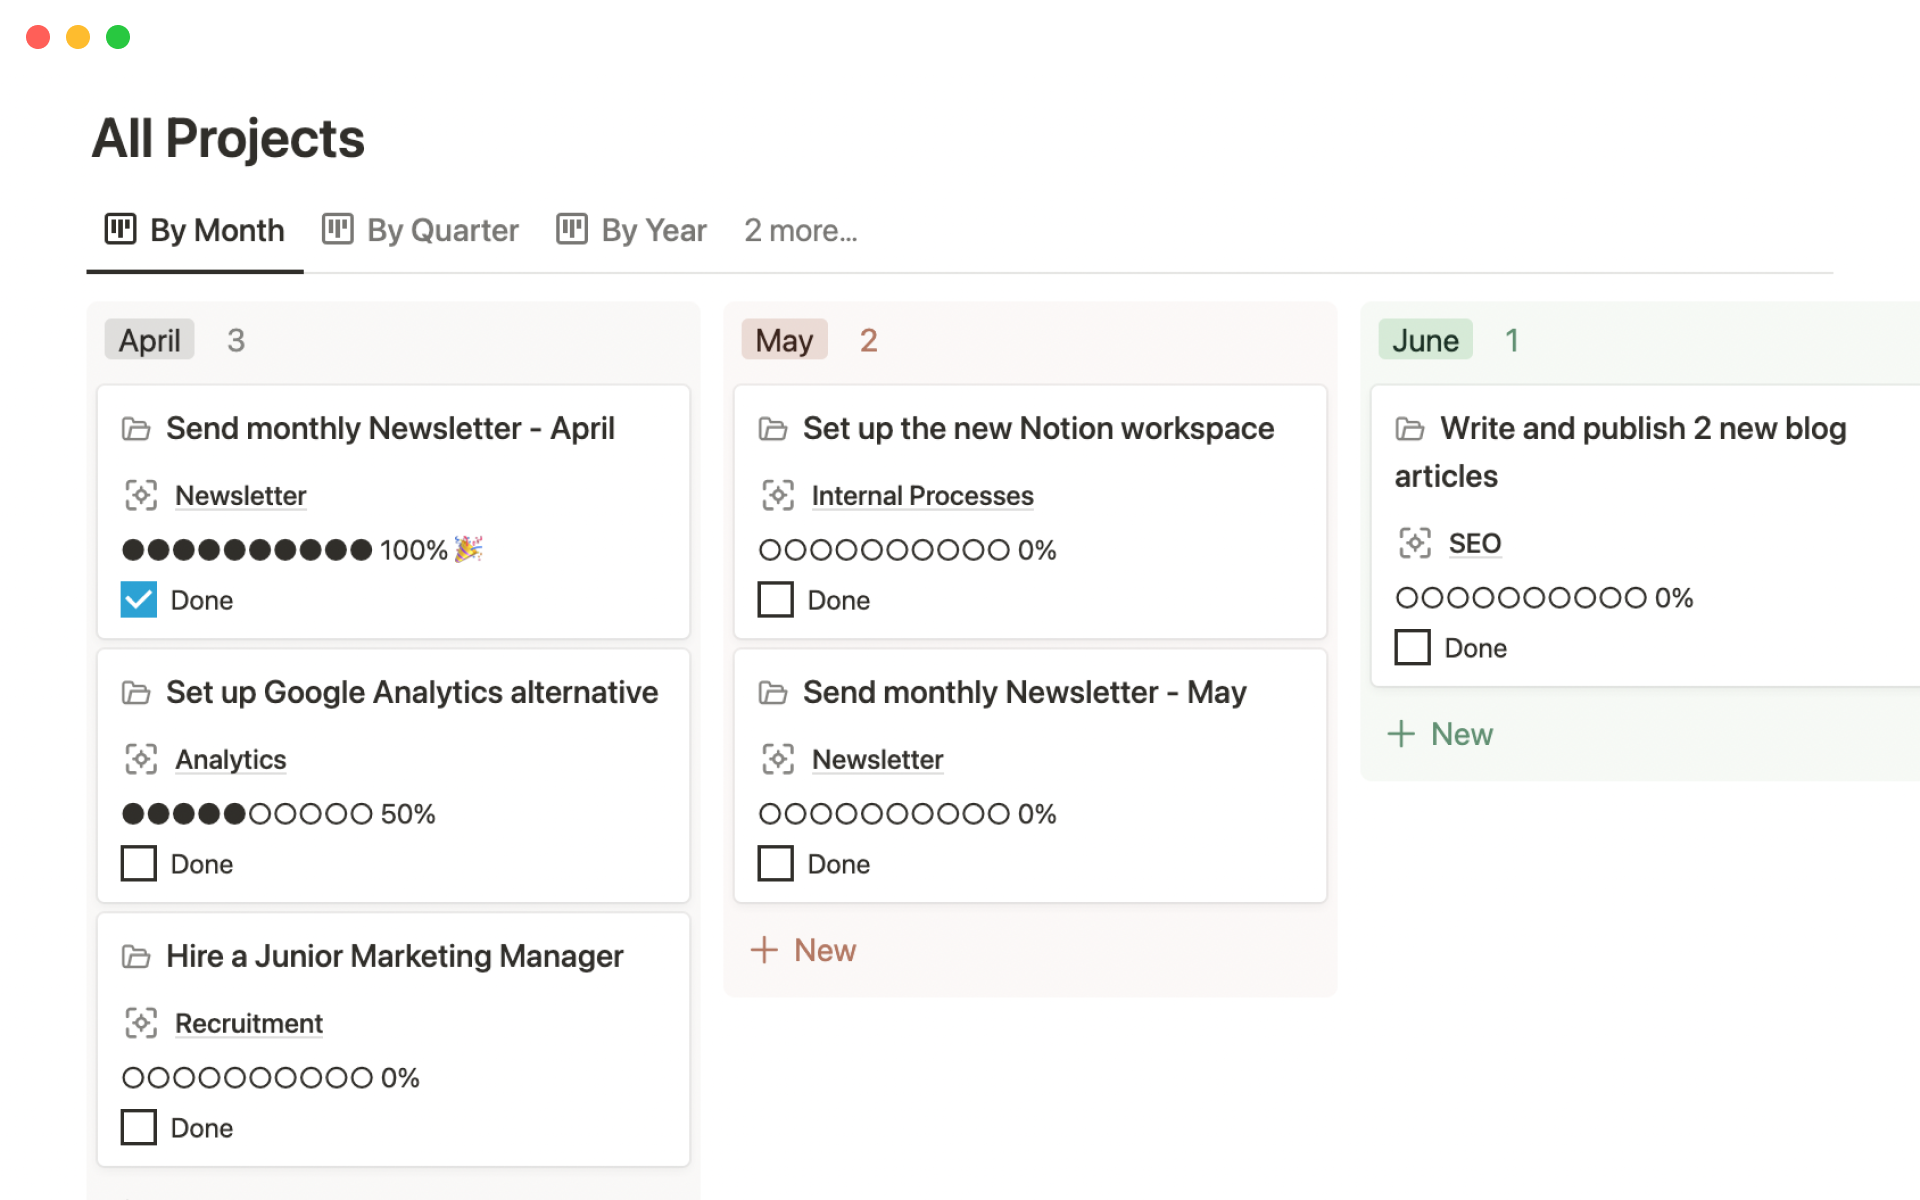 Want Agile results? Use Notion for Agile management